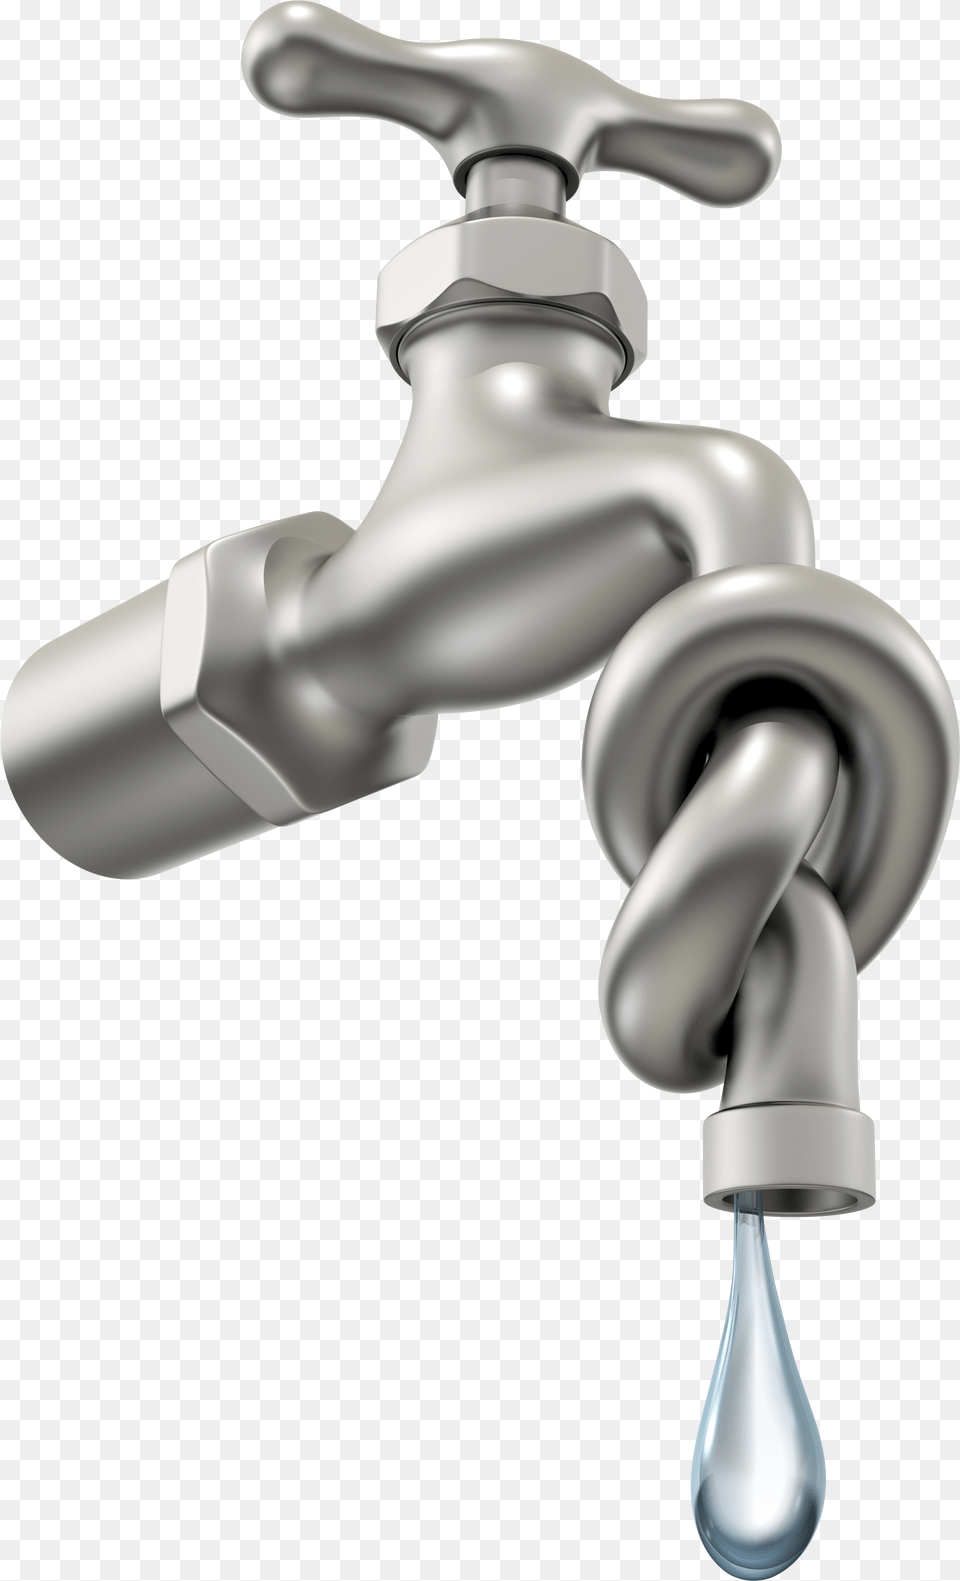 Twisted Faucet With Water Drip Trophy Club Municipal Semen Leakage Penis Free Png